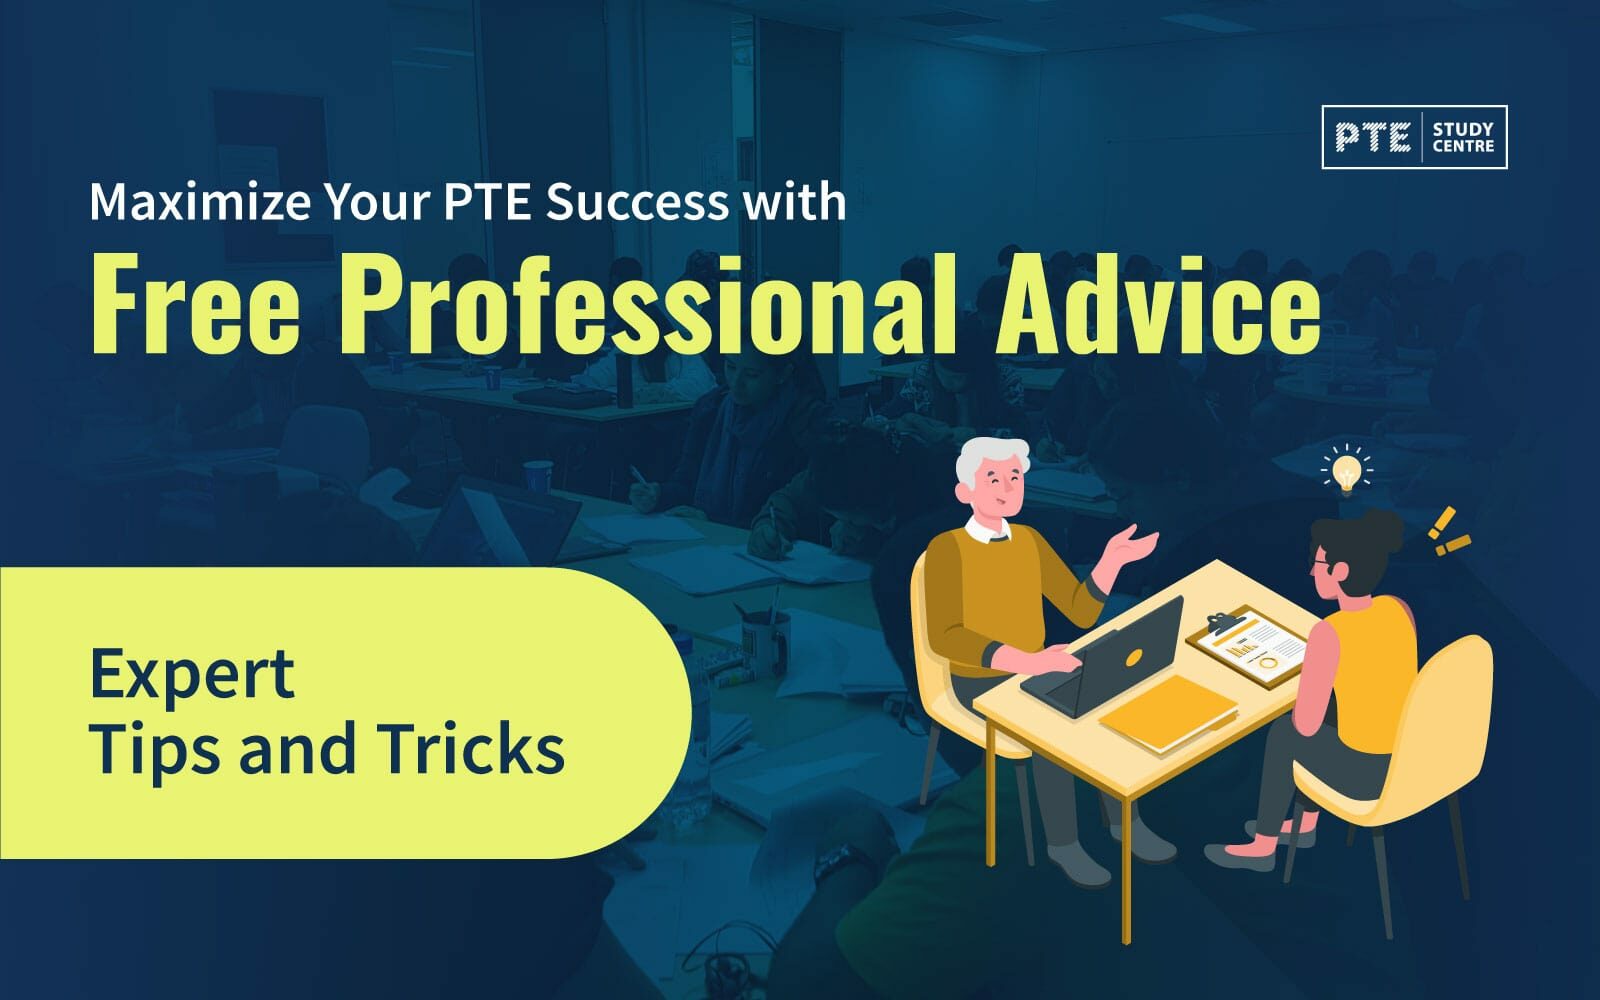 Maximize Your PTE Success with Free Professional Advice: Expert Tips and Tricks